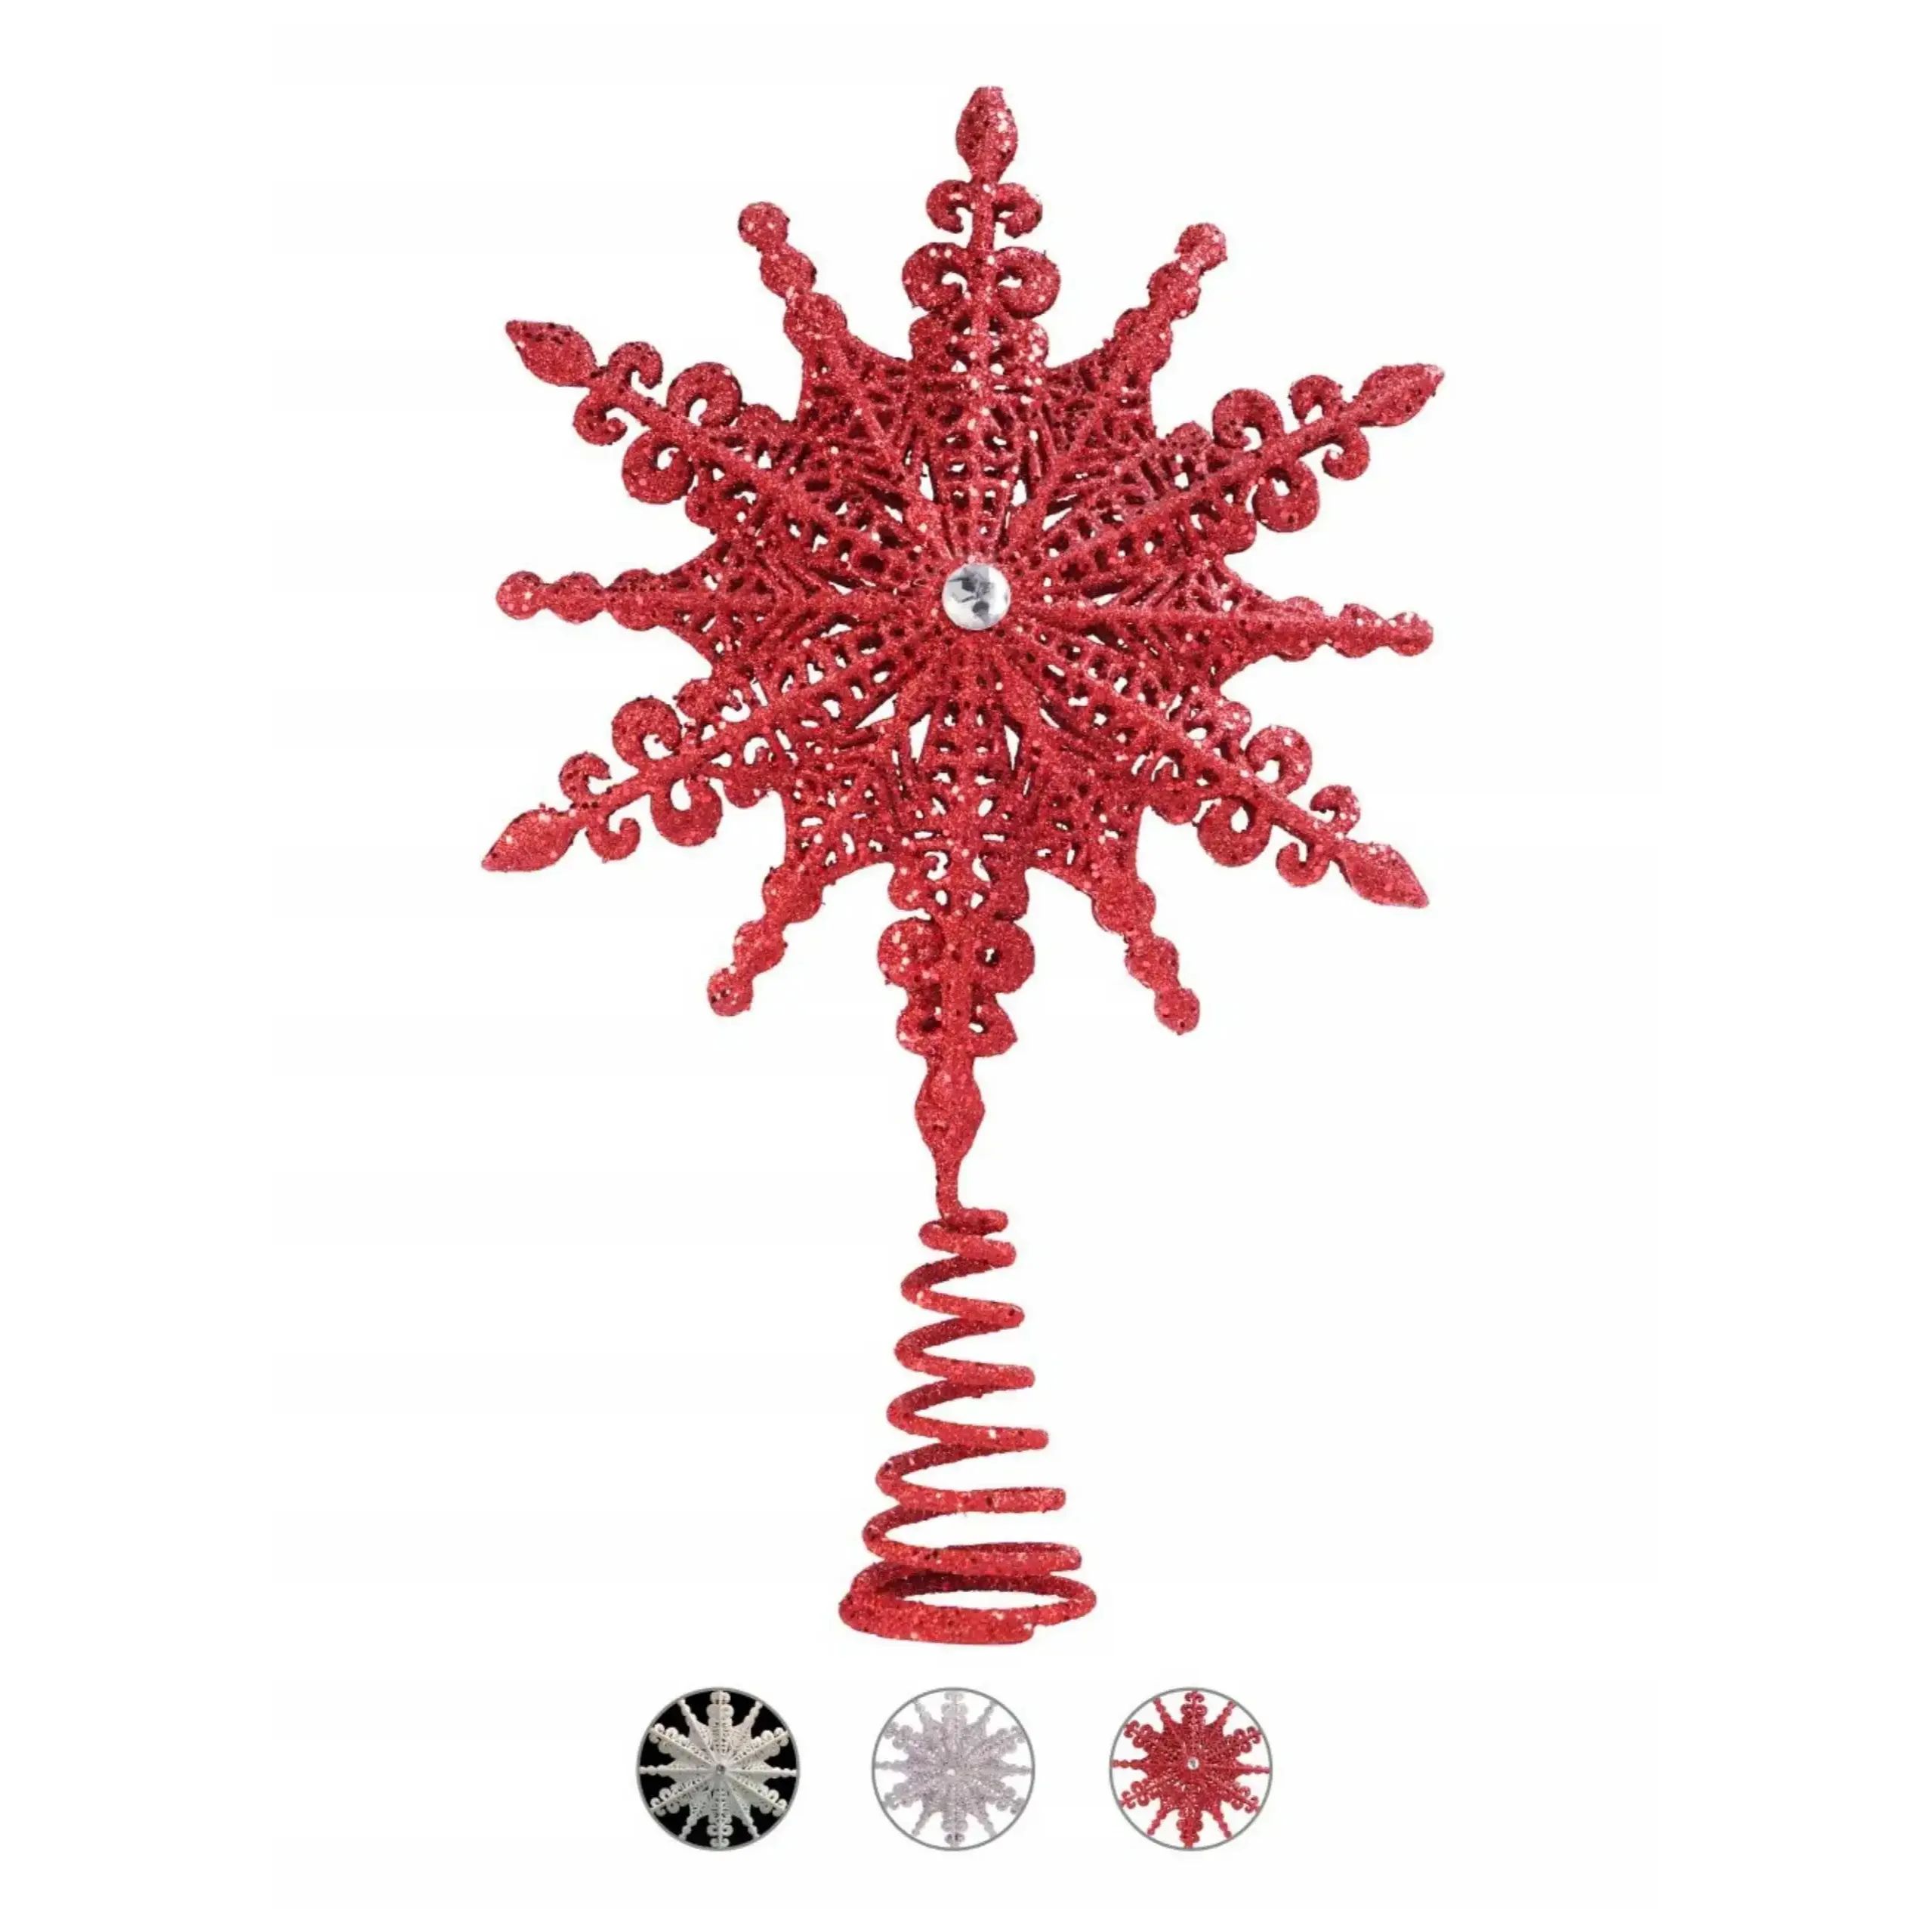 OEM ODM Christmas Traditions 8 inch Red Glittered Filigree Christmas Star Tree Topper Star/Home Decor Ornaments (Red)